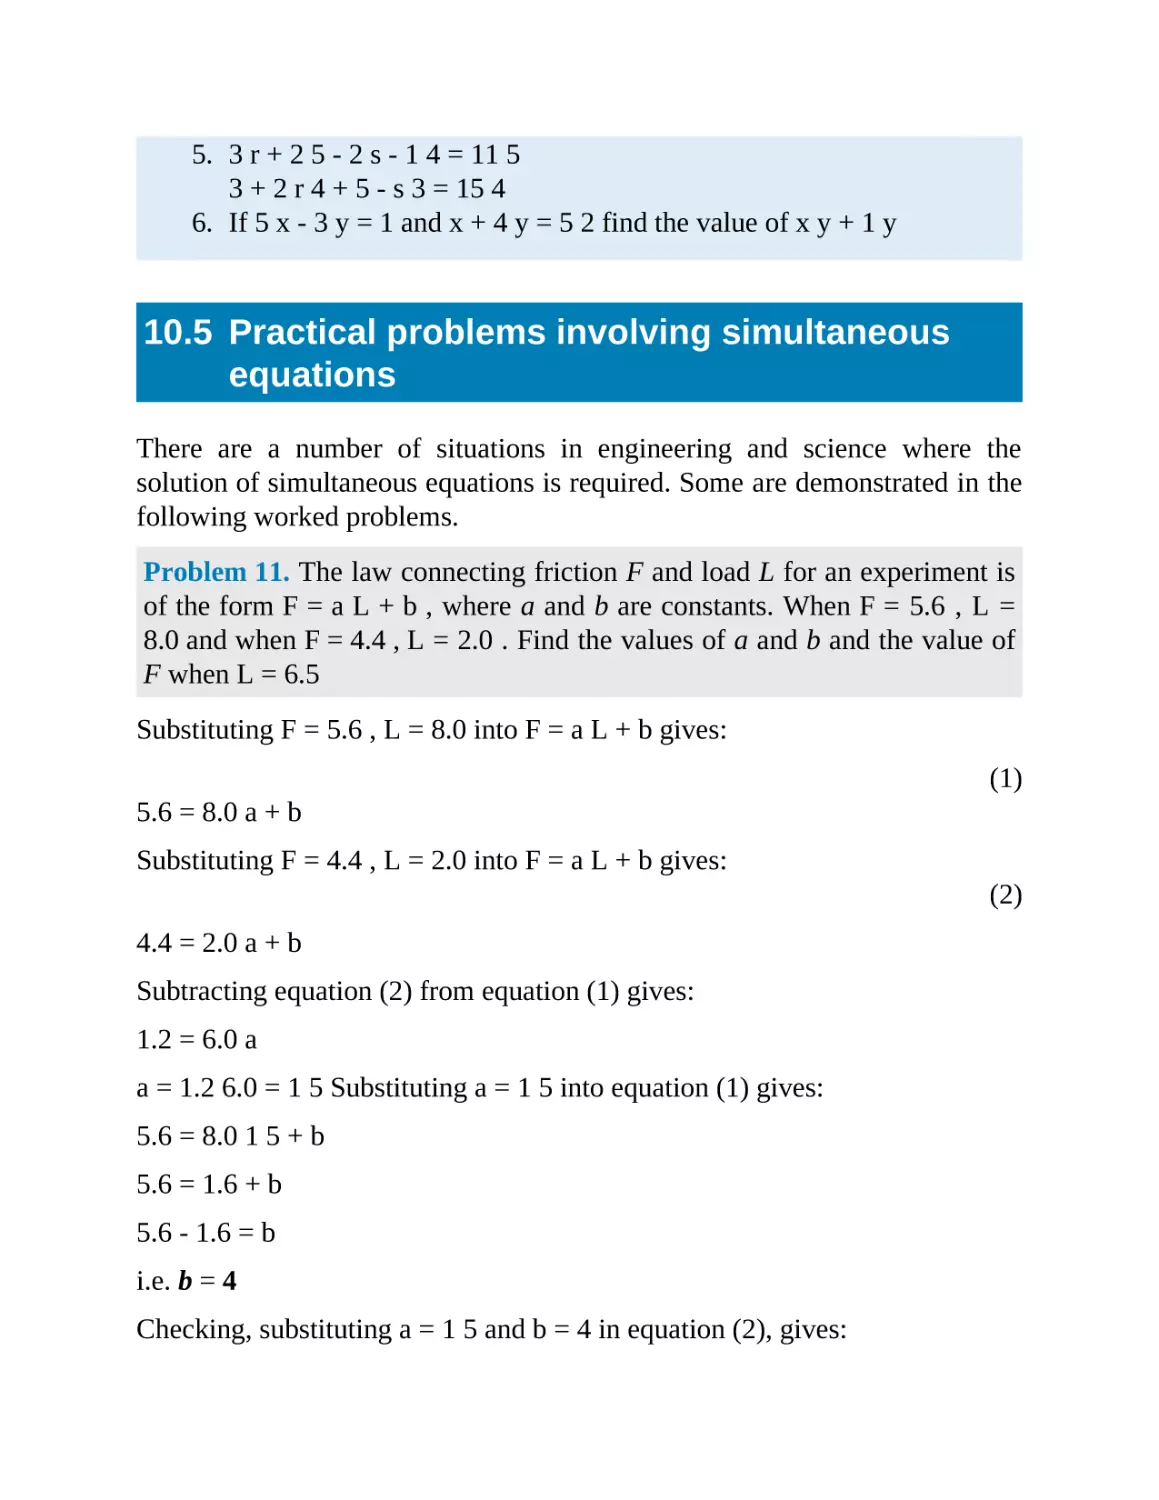 10.5 Practical problems involving simultaneous equations